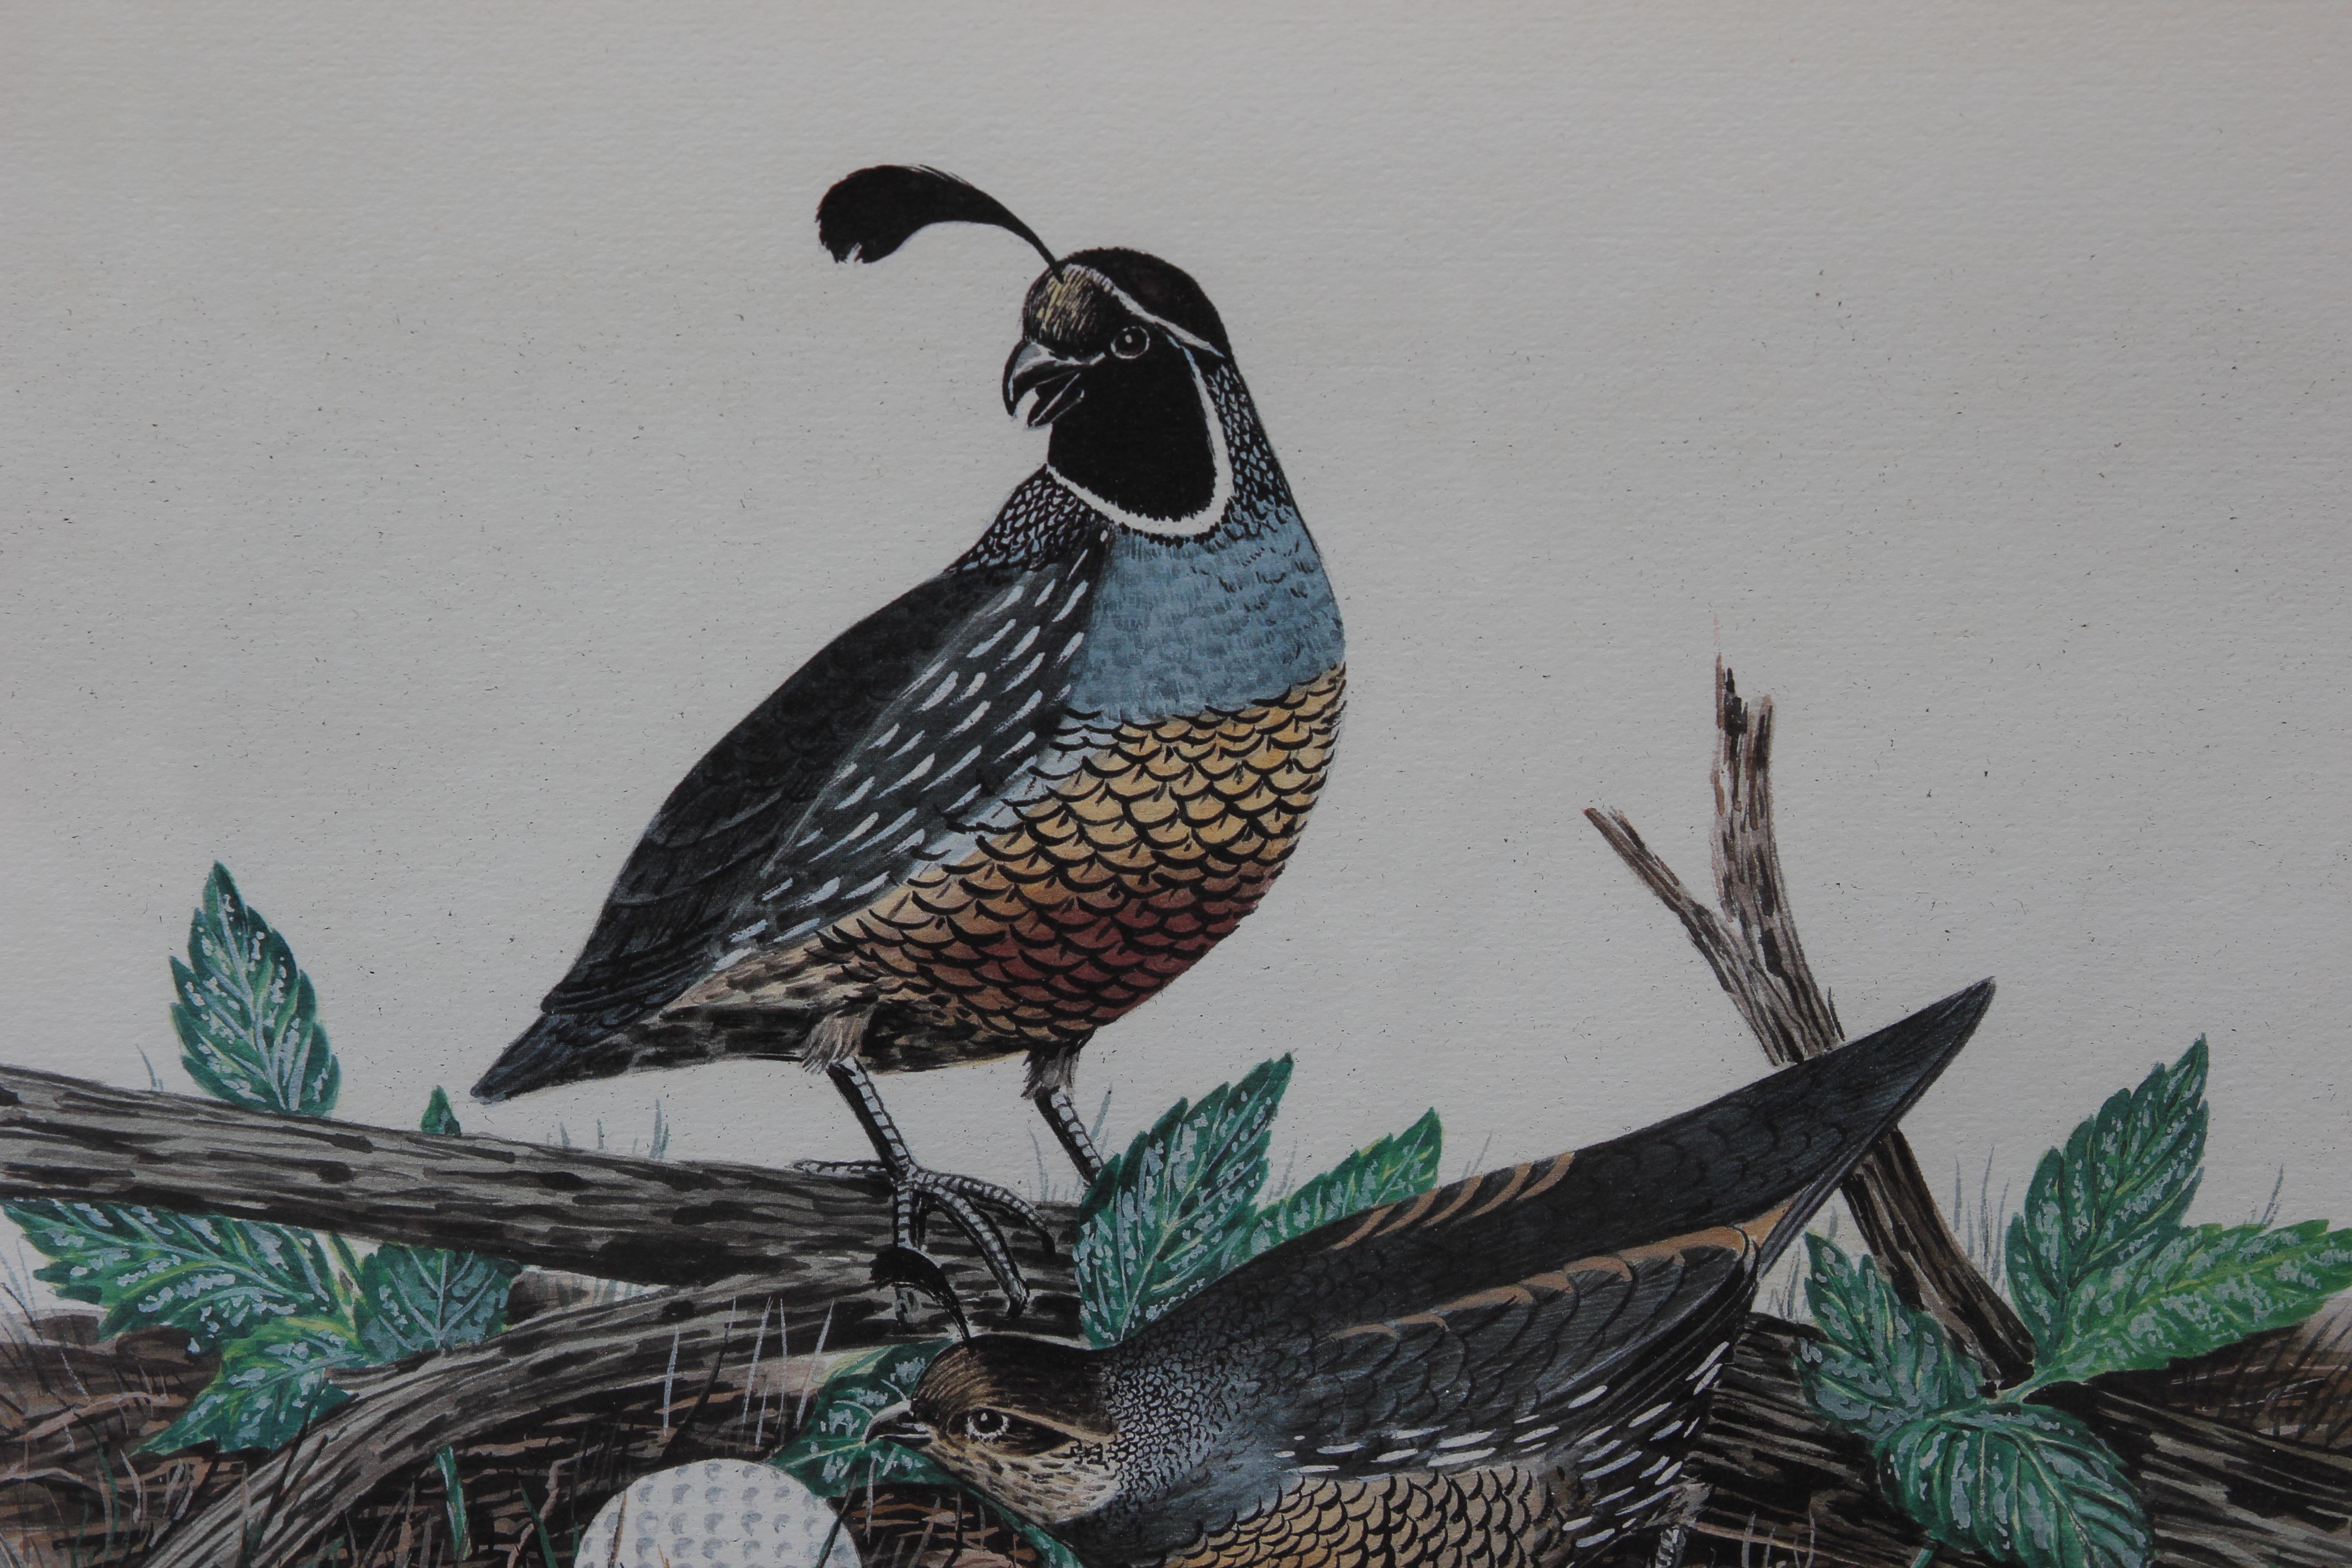 Naturalistic Quails with Golf Ball Lithograph 172 of 350 - Print by Jack Wall